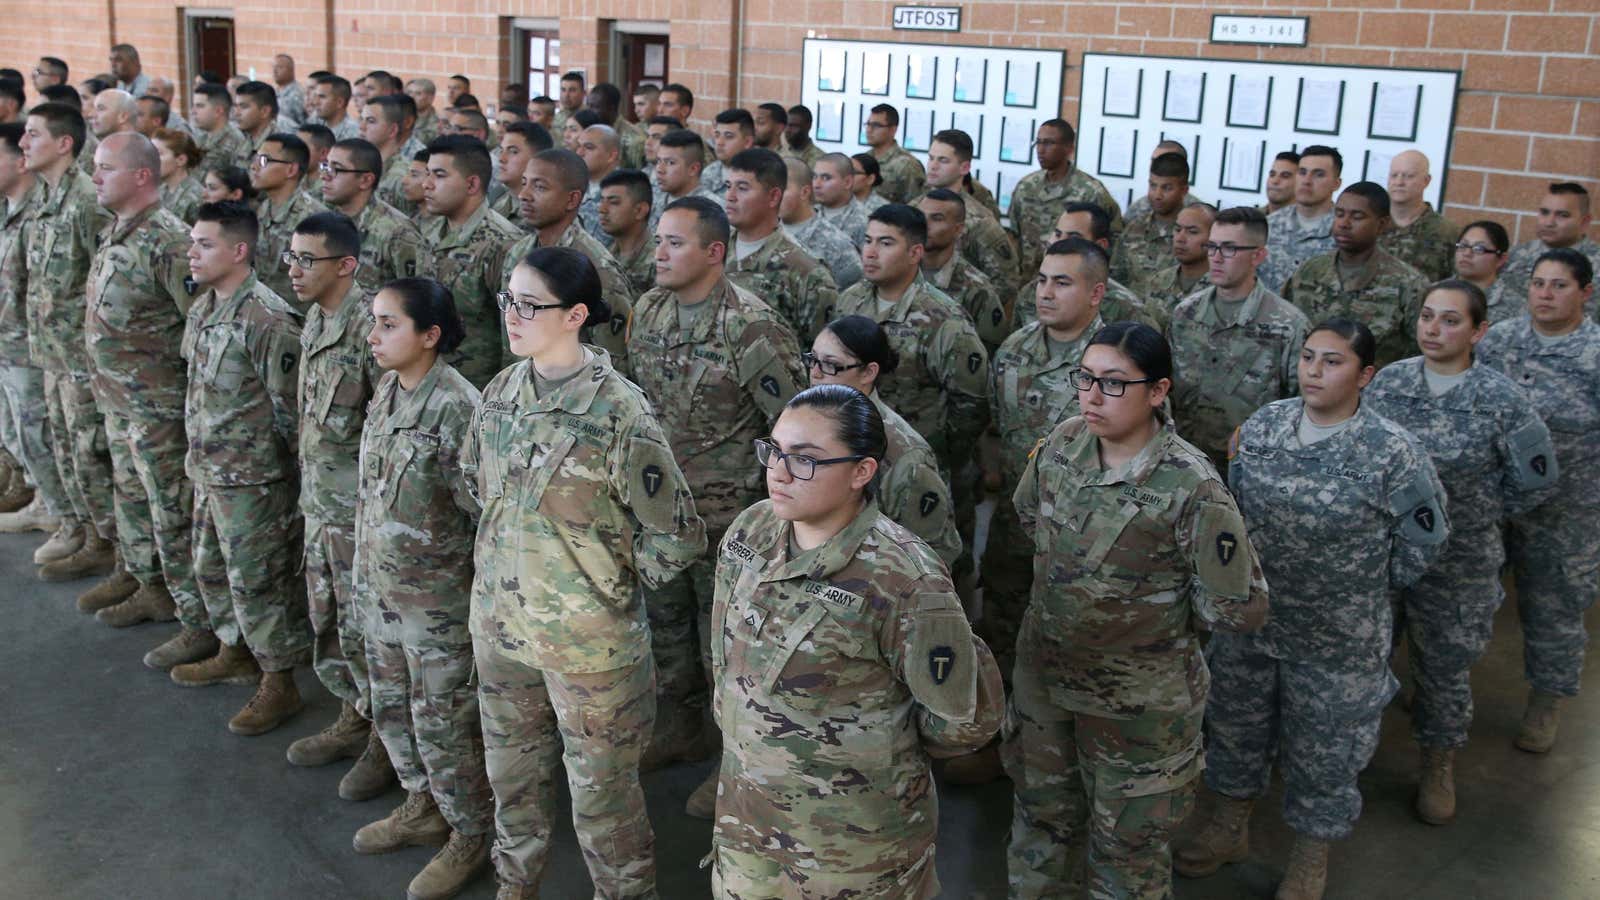 Members of the Texas National Guard await a speech on border security, April 2018.